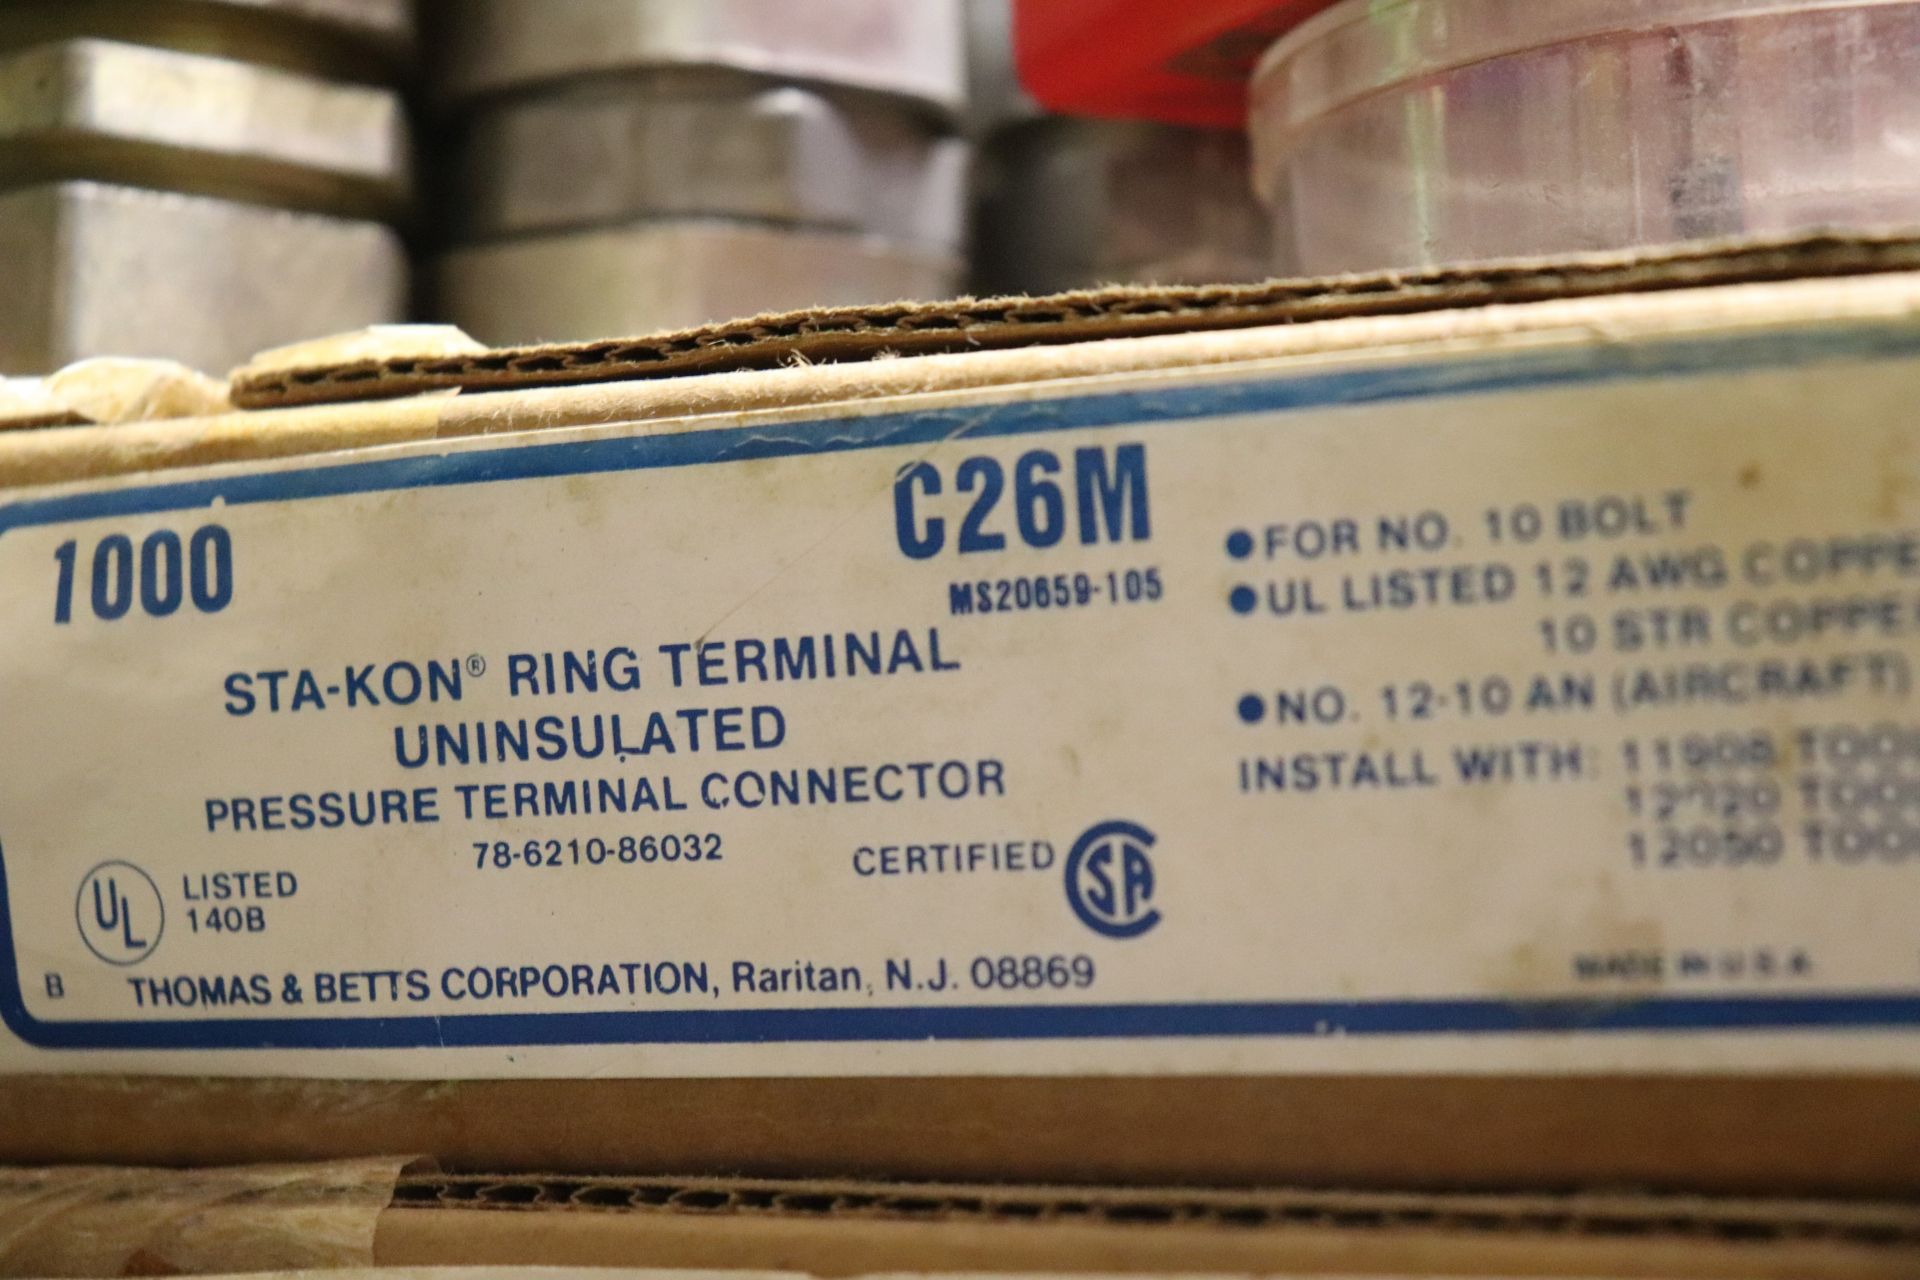 Nine boxes of Sta-Kon ring terminal uninsulated pressure terminal connectors - Image 2 of 2